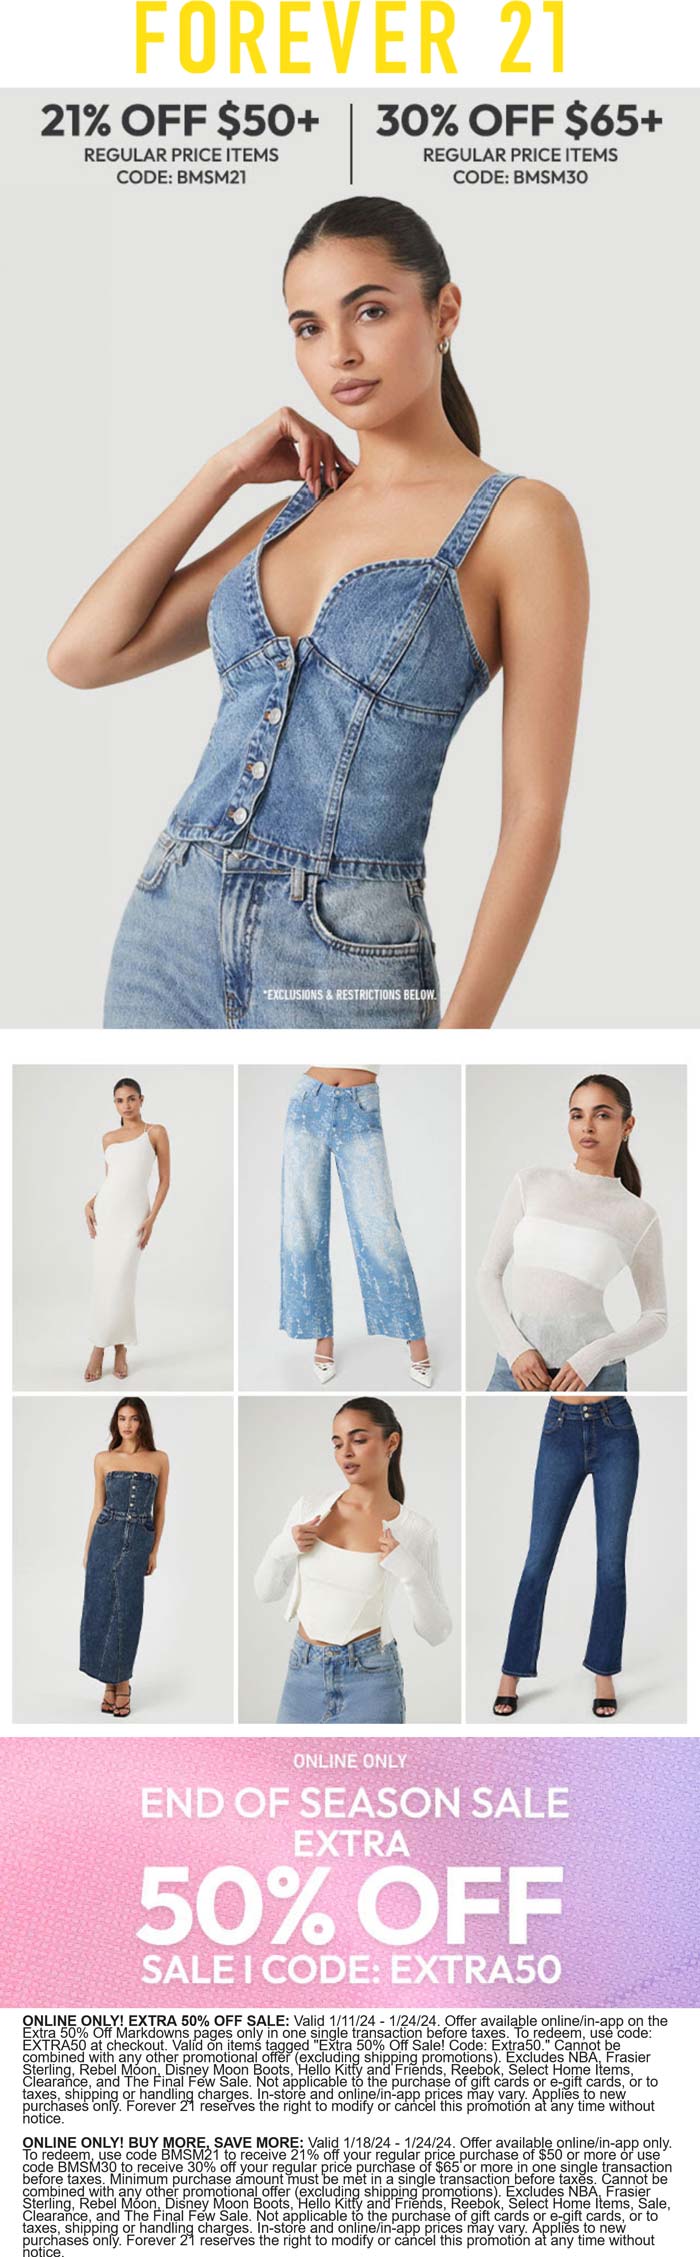 Extra 50% off sale items & more online at Forever 21 via promo code Extra50 #forever21